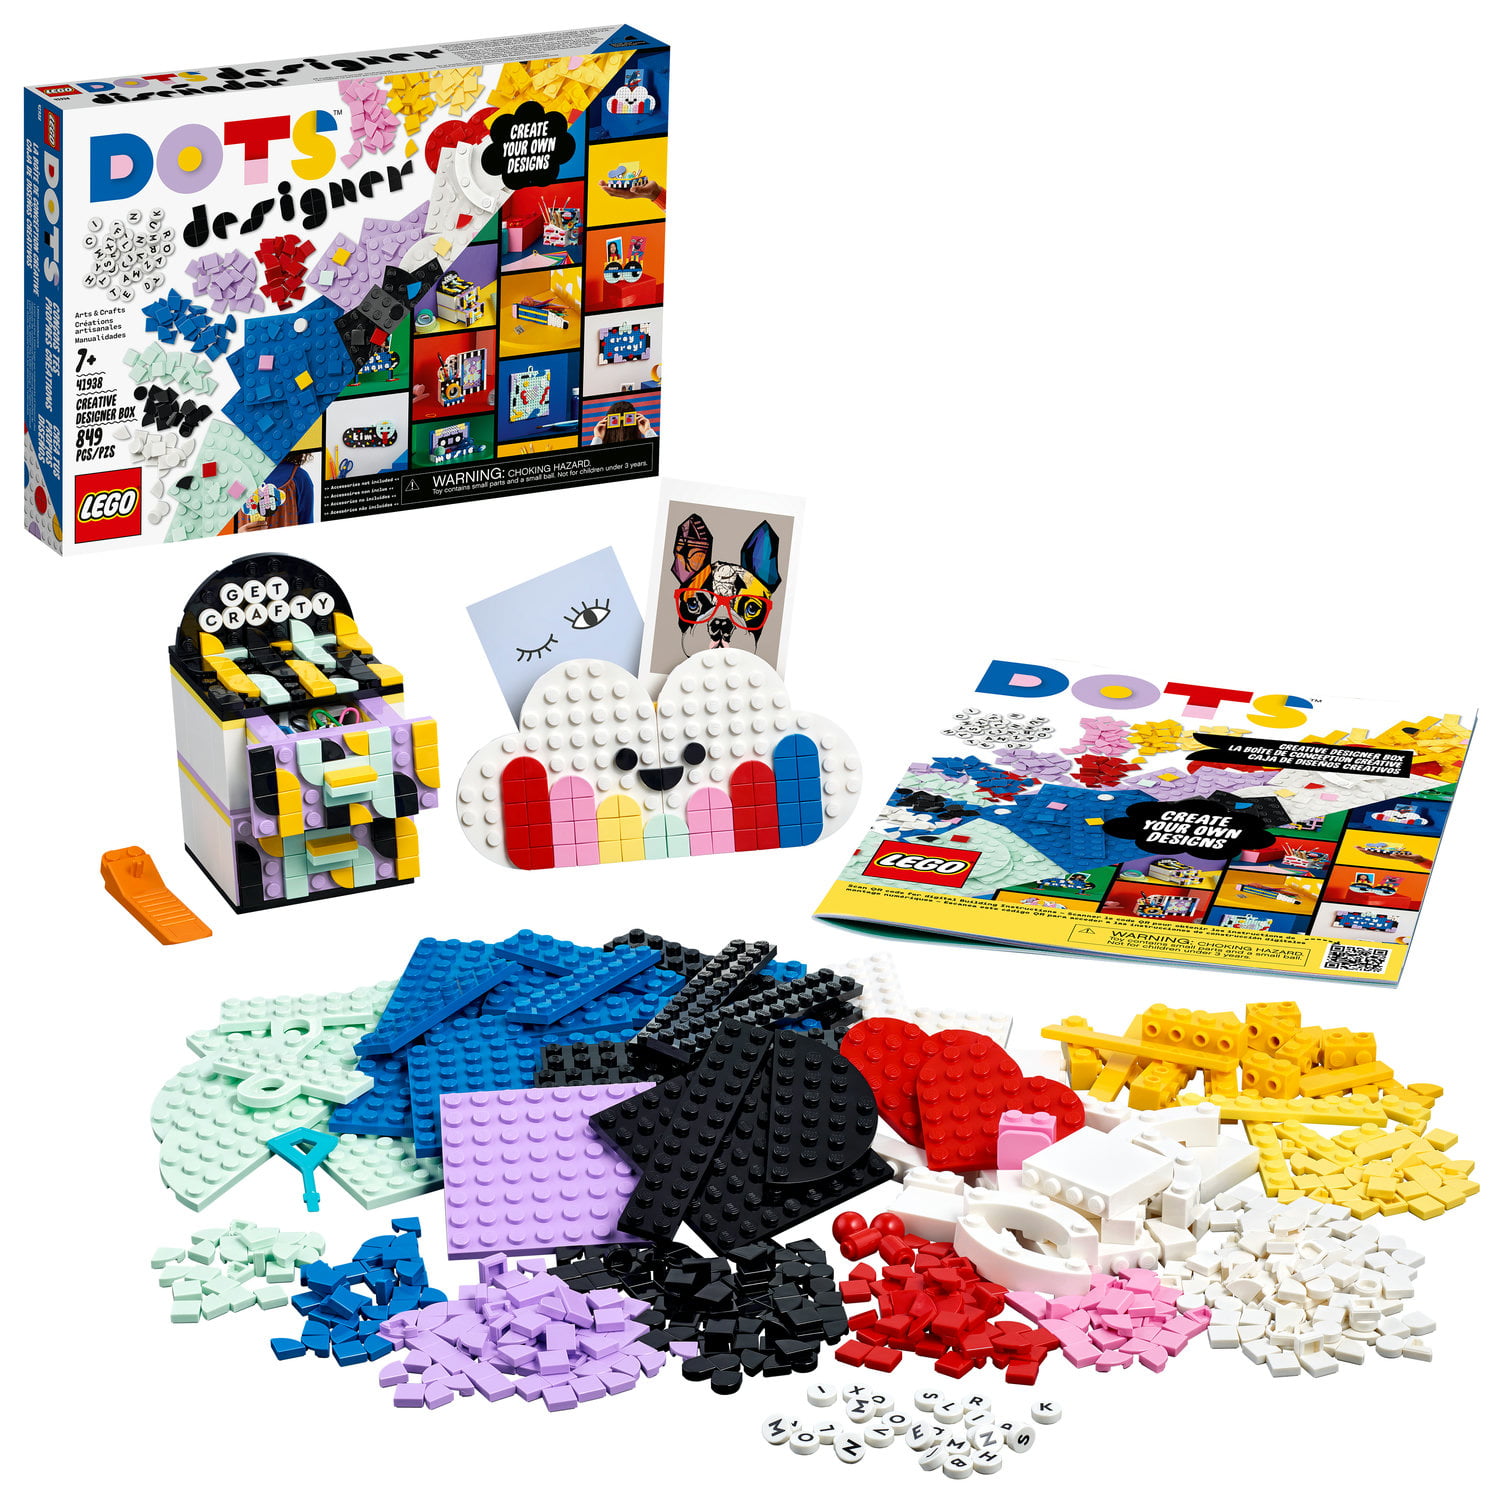 LEGO DOTS Desk Organizer 41907 DIY Craft Decorations Kit for Kids who Like Designing and Redesigning Their Own Room Decor Items to Use New 2020 405 Pieces Makes a Fun and Inspirational Gift